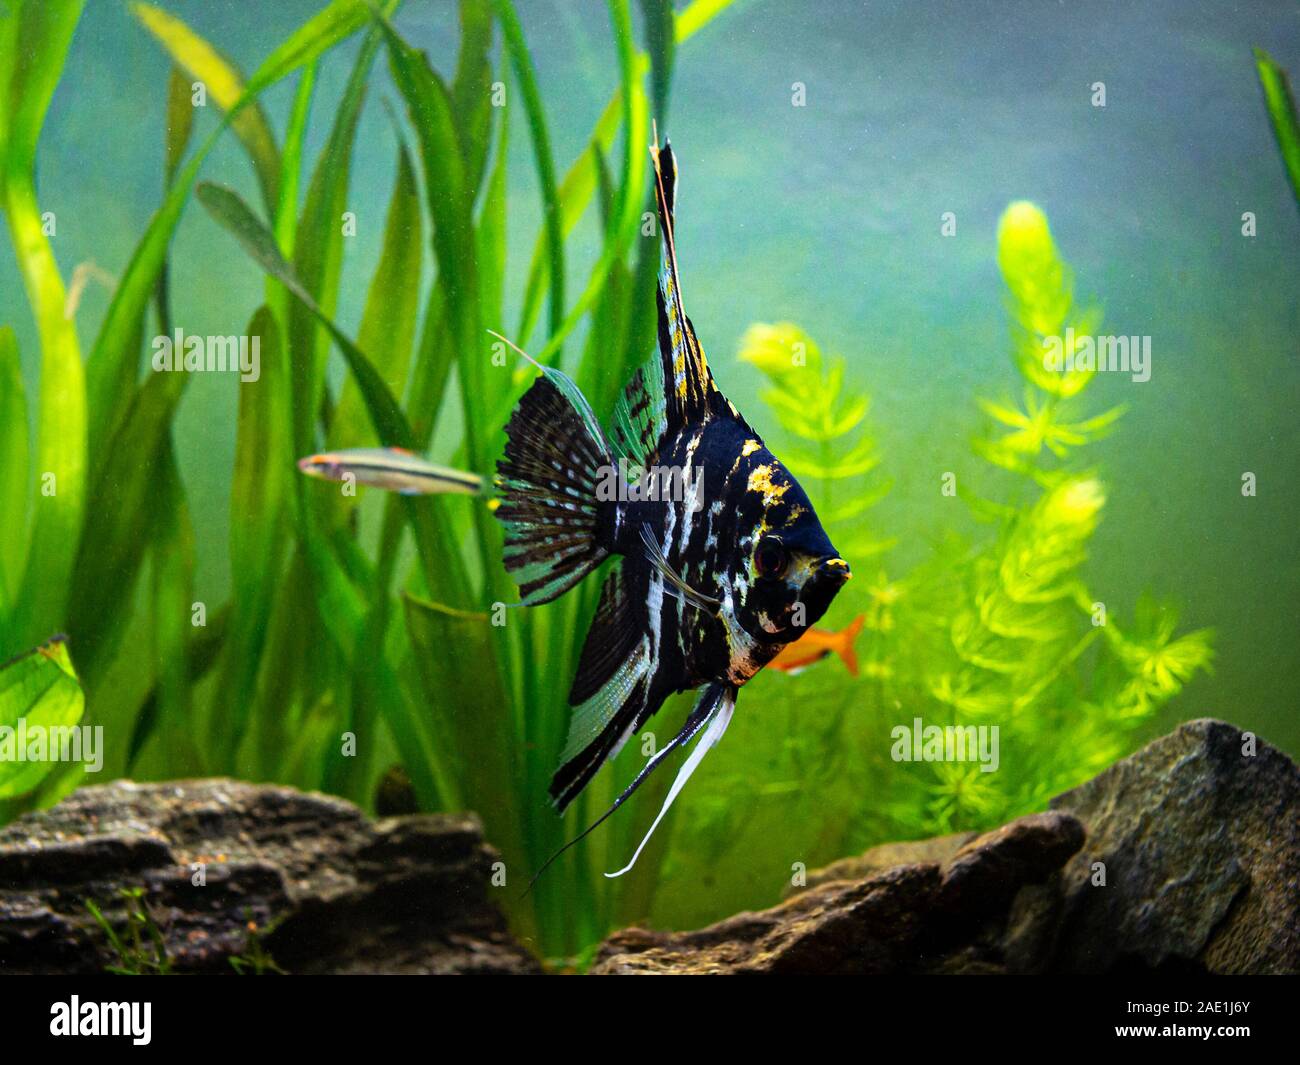 Black And White Angel Fish In A Fish Tank Stock Photo Alamy,What Are Wheat Pennies Worth 1945